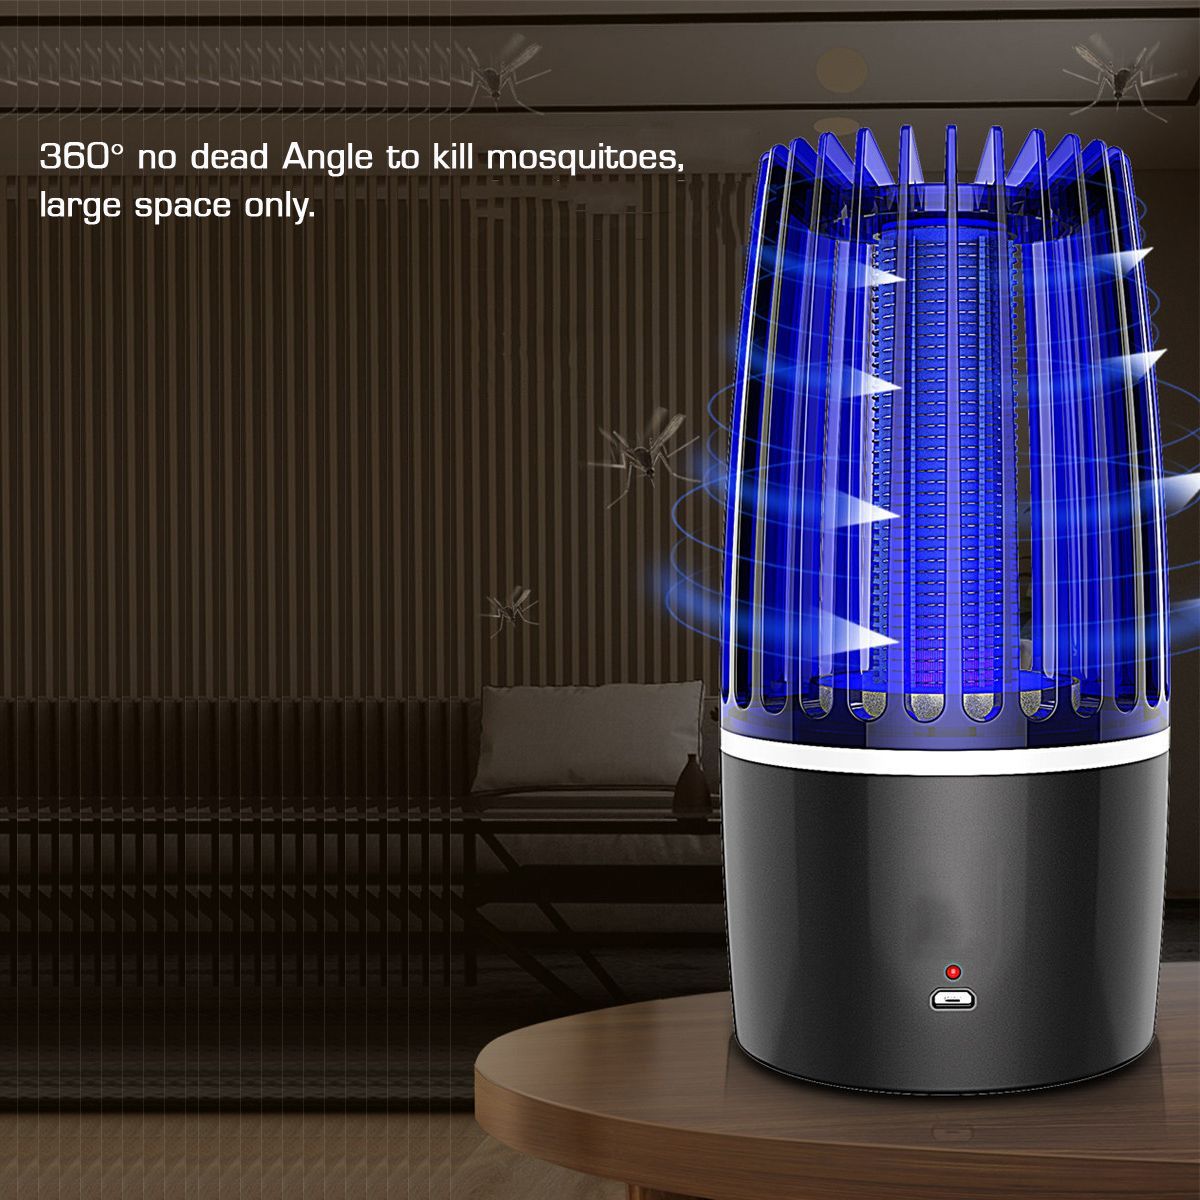 USB-LED-Electric-Mosquito-Zapper-Killer-Fly-Insect-Bug-Trap-Lamp-Light-Bulb-5W-1668714